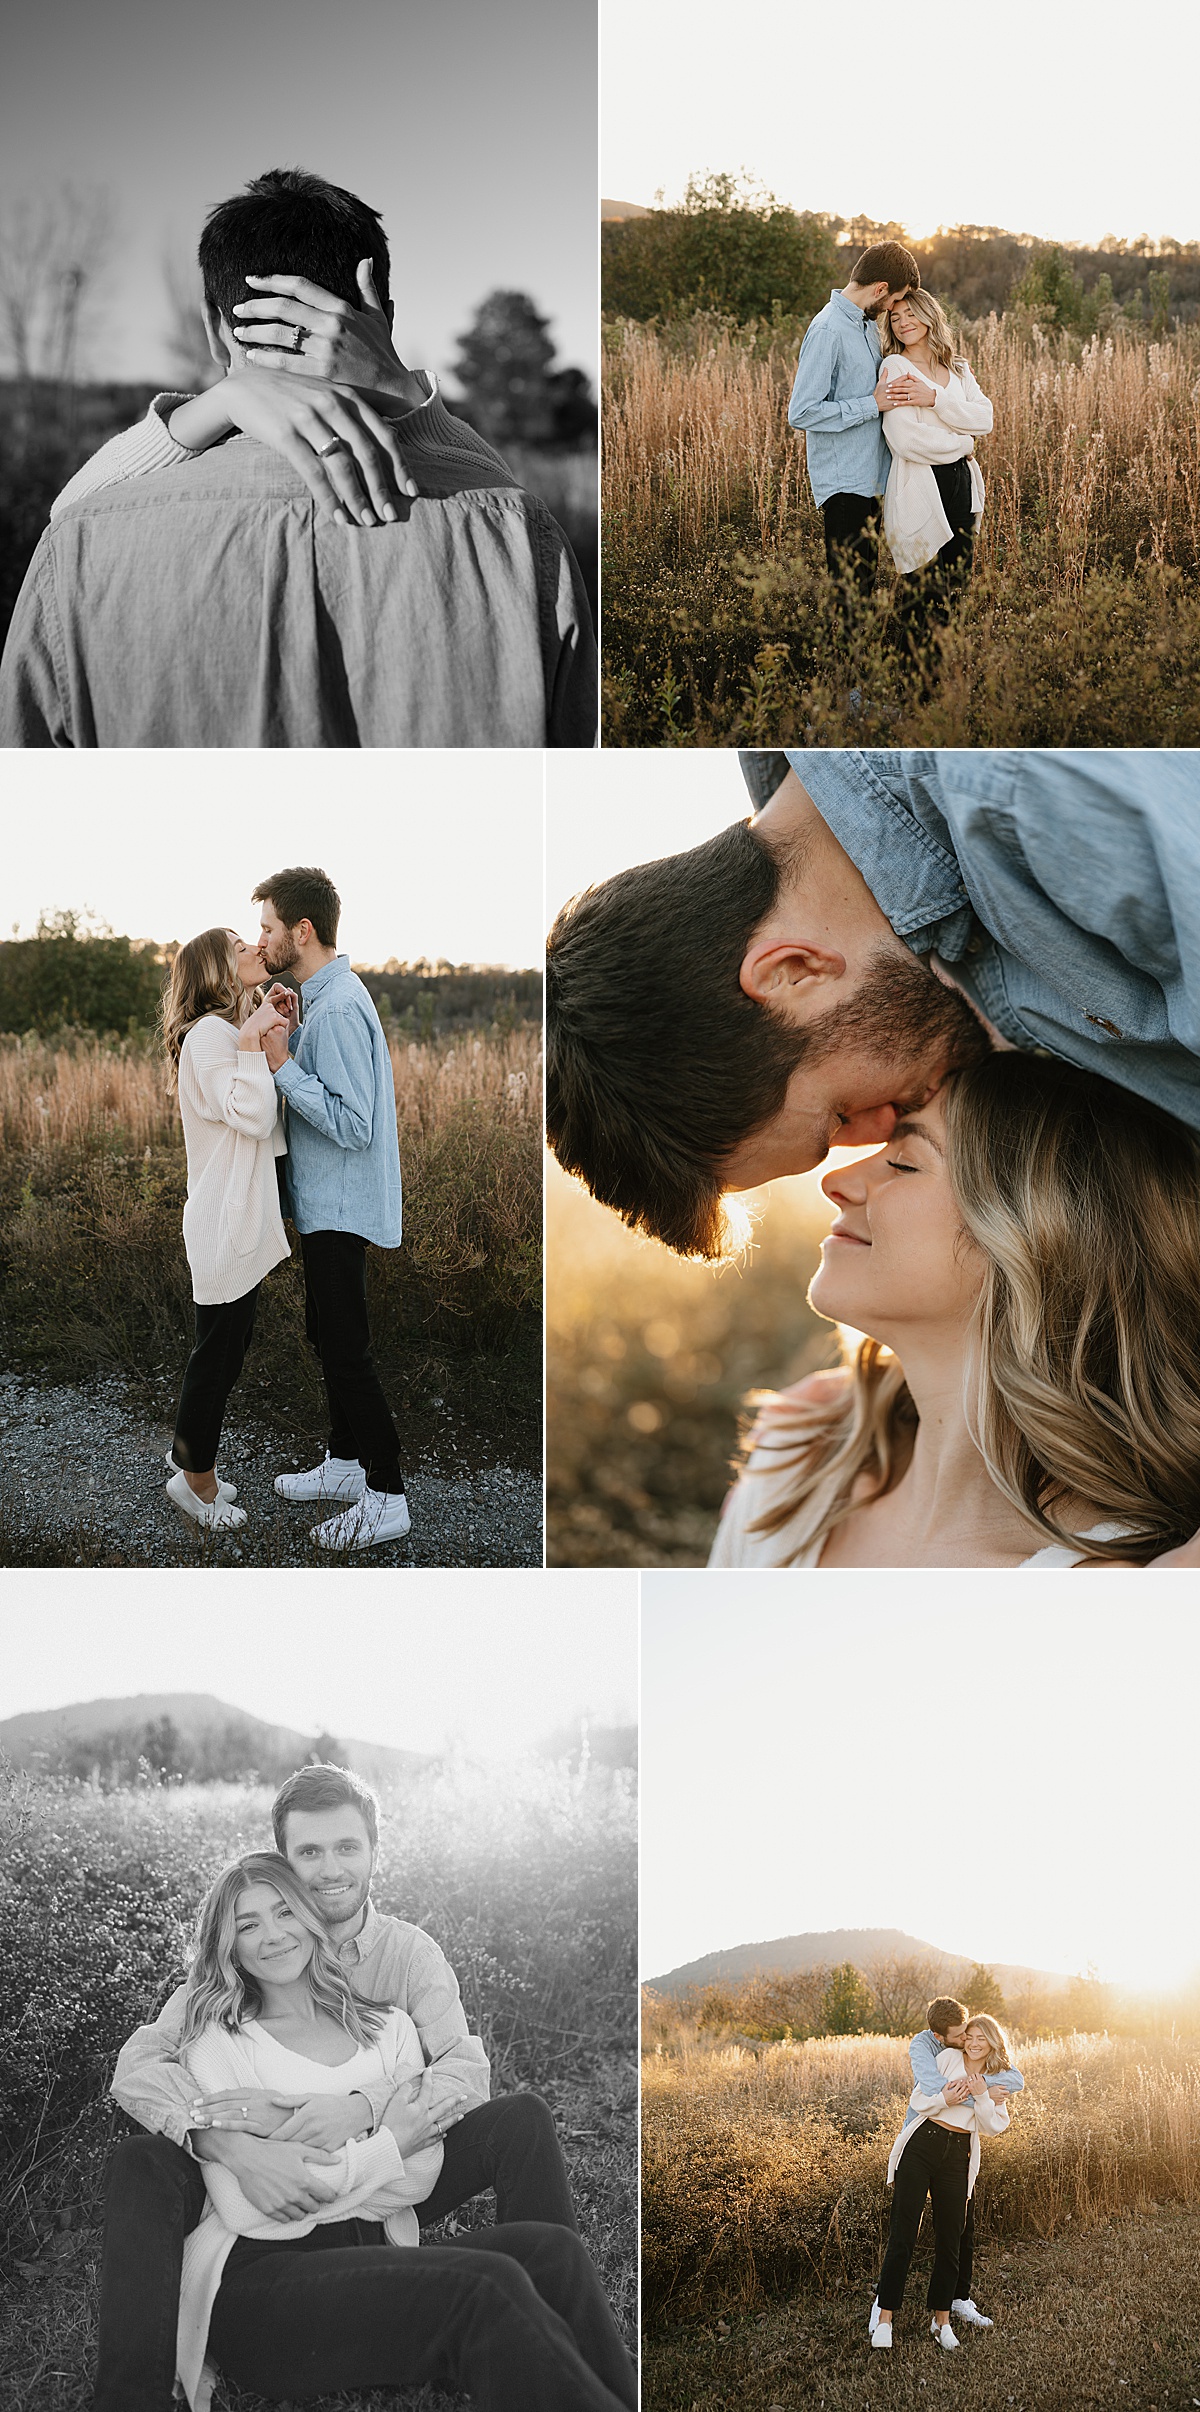 Golden hour engagement photos in Tennessee with tall grass.